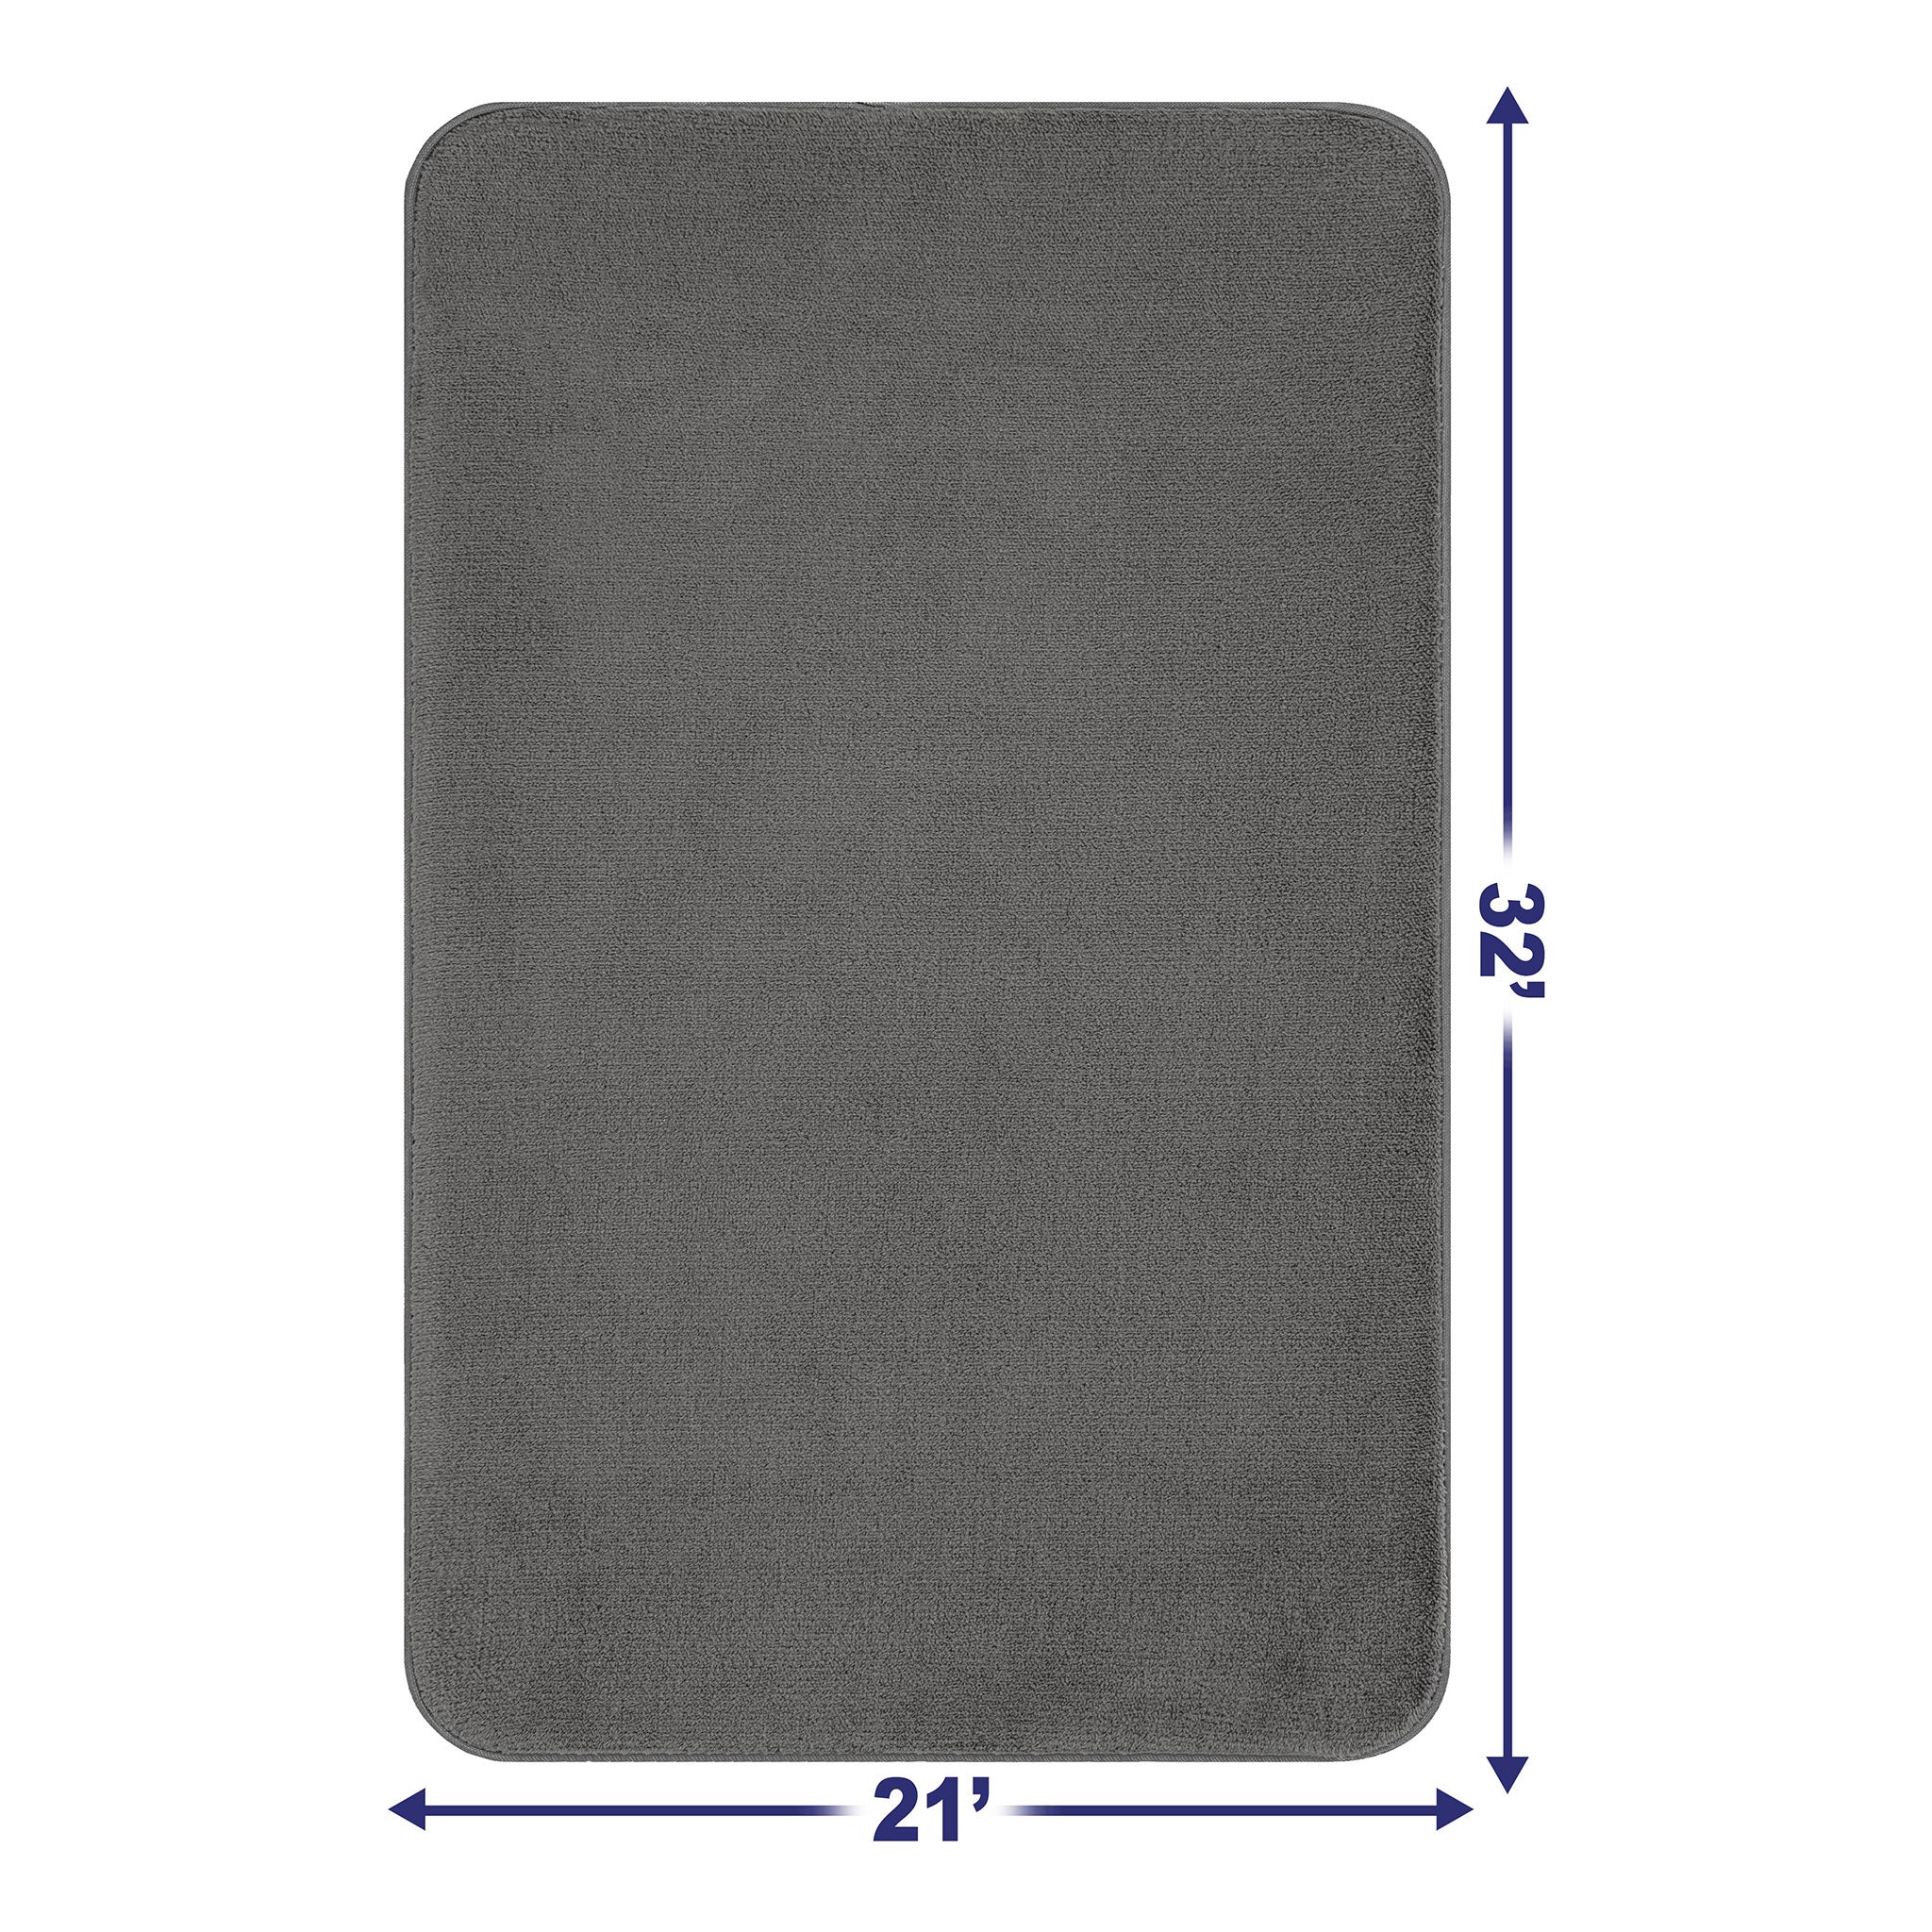 EXTRA THICK BLOCKING Mats for Wet and Steam Blocking Includes Pack of 9 1cm  $71.80 - PicClick AU